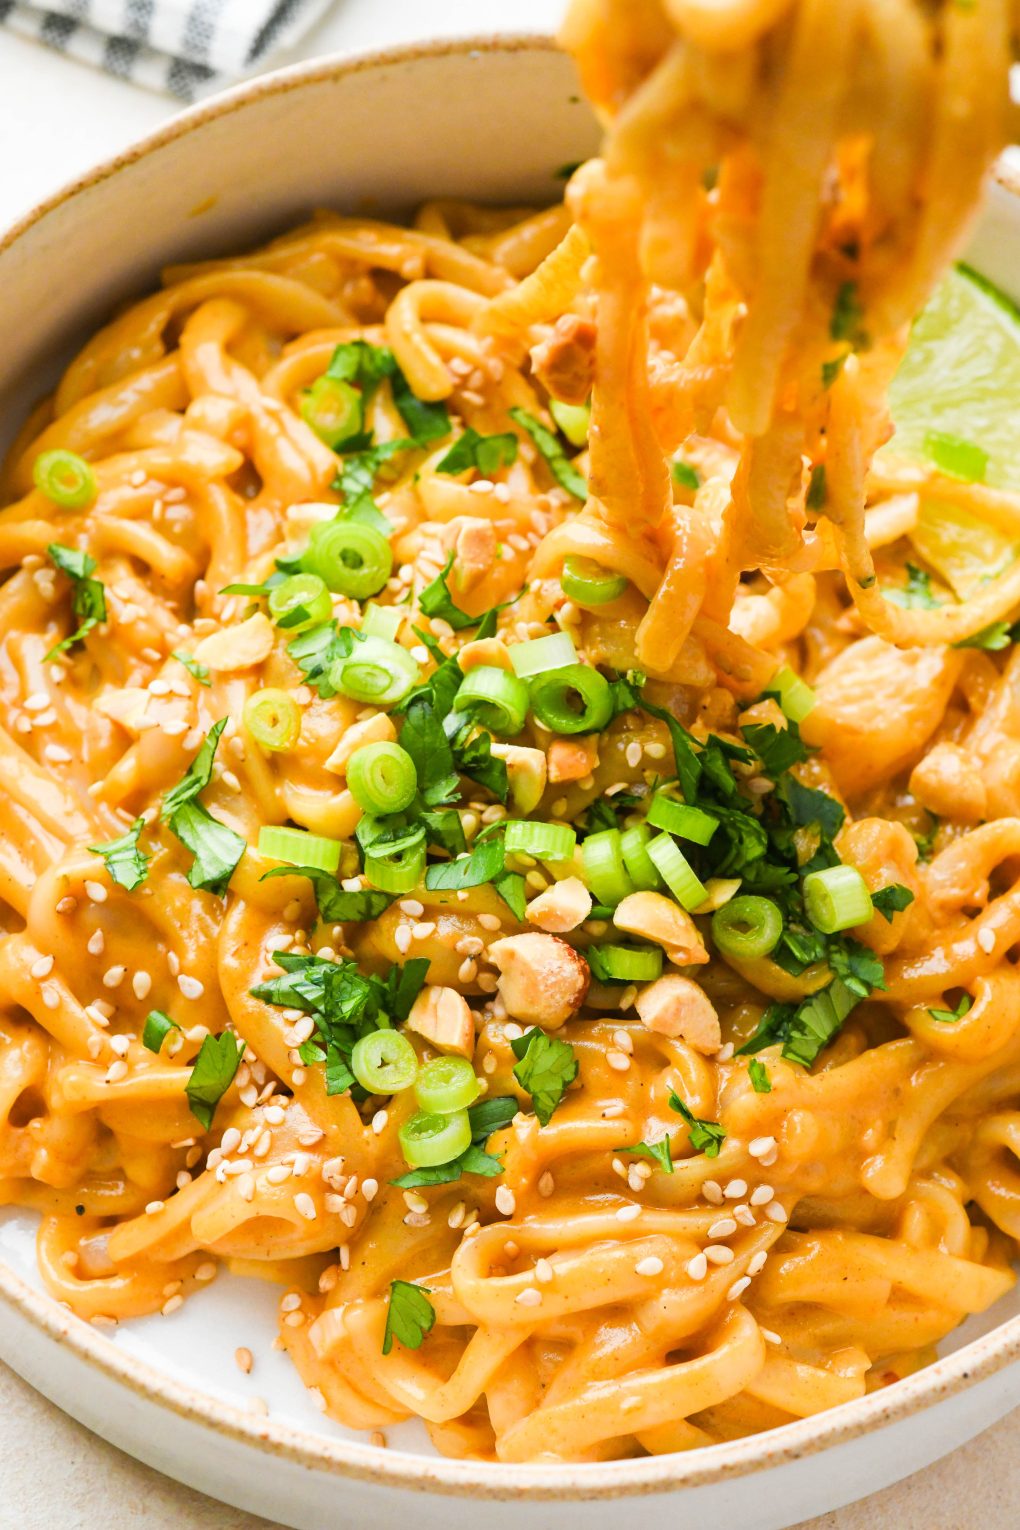 Red curry peanut noodles piled into a small ceramic bowl and topped with cilantro, green onions, sesame seeds, and chopped peanuts. A fork is lifting out a bite from the tangle of noodles.